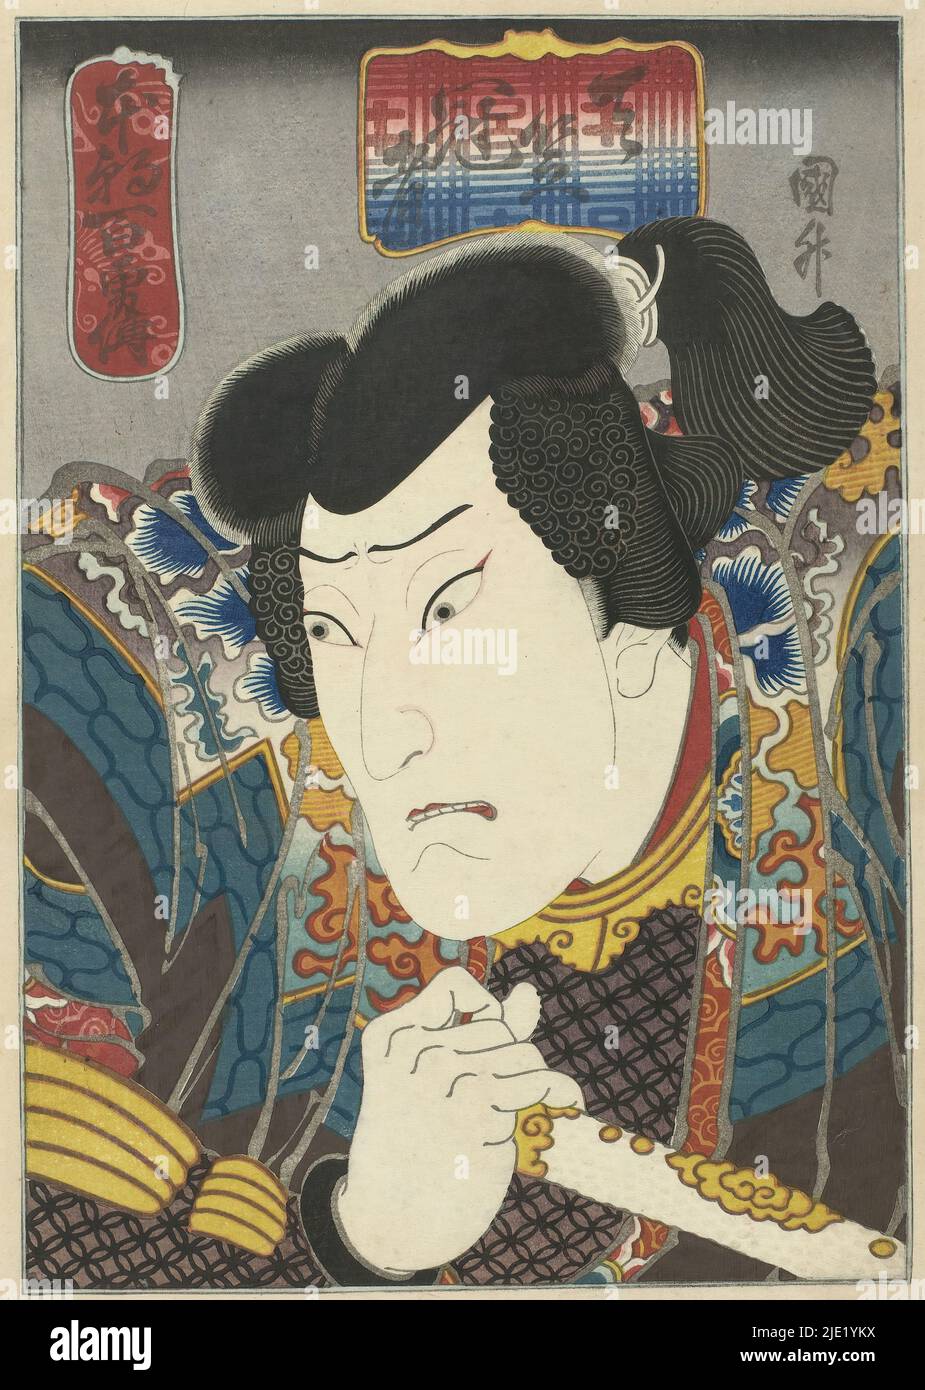 Ôkawa Hashizô I as Tenjiku Kanja, One hundred stories of bravery in our country (series title), Honchô hyakuyûden (series title on object), Stage actor Ôkawa Hashizô I as Tenjiku Kanja (Tokubei), in the play 'Sangoku ichi tsui no kuromono', performed at the Kado Theater in the eighth month of 1848., print maker: Sadamasu (II) , Utagawa, (attributed to), Osaka, Aug-1848, paper, color woodcut, height 244 mm × width 174 mm Stock Photo